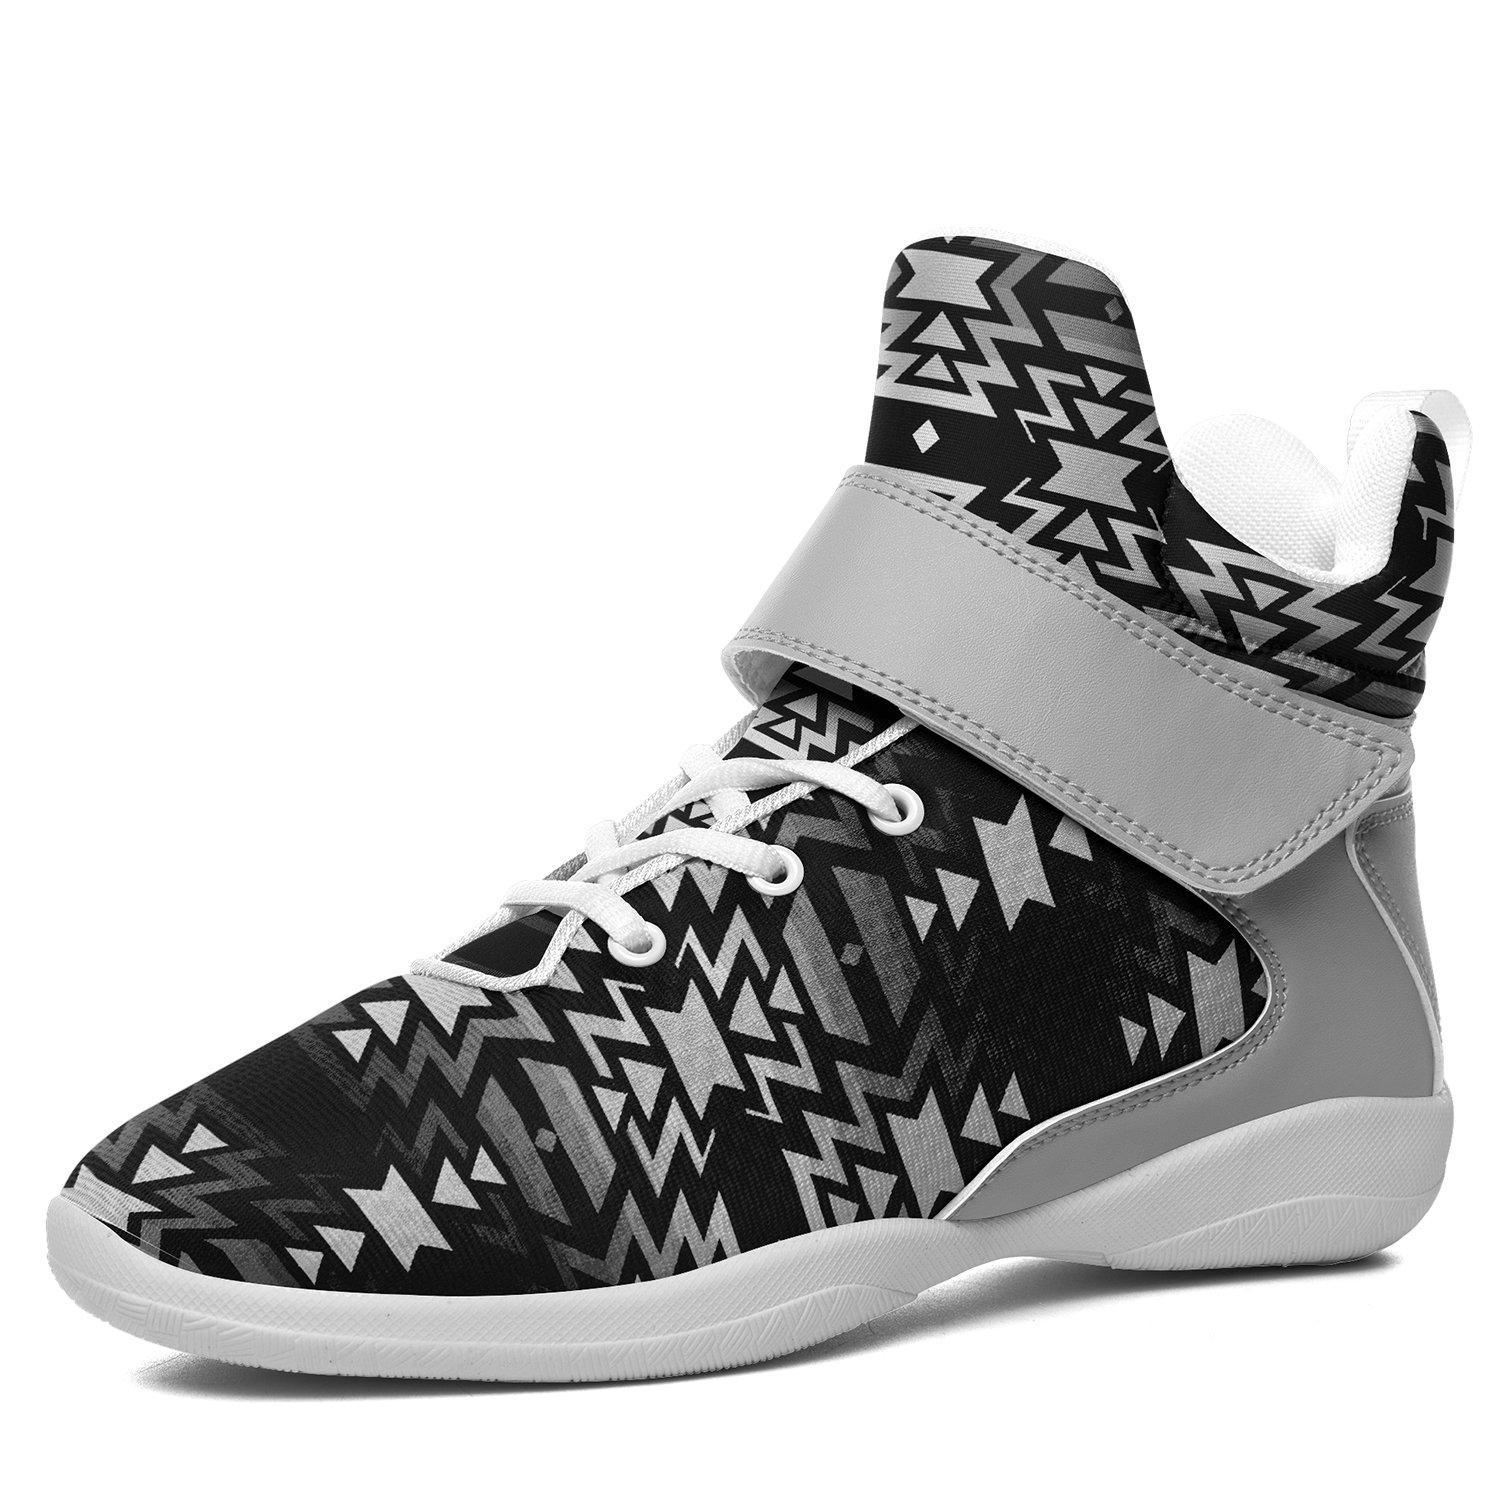 Black Fire Black and White Kid's Ipottaa Basketball / Sport High Top Shoes 49 Dzine US Women 4.5 / US Youth 3.5 / EUR 35 White Sole with Gray Strap 